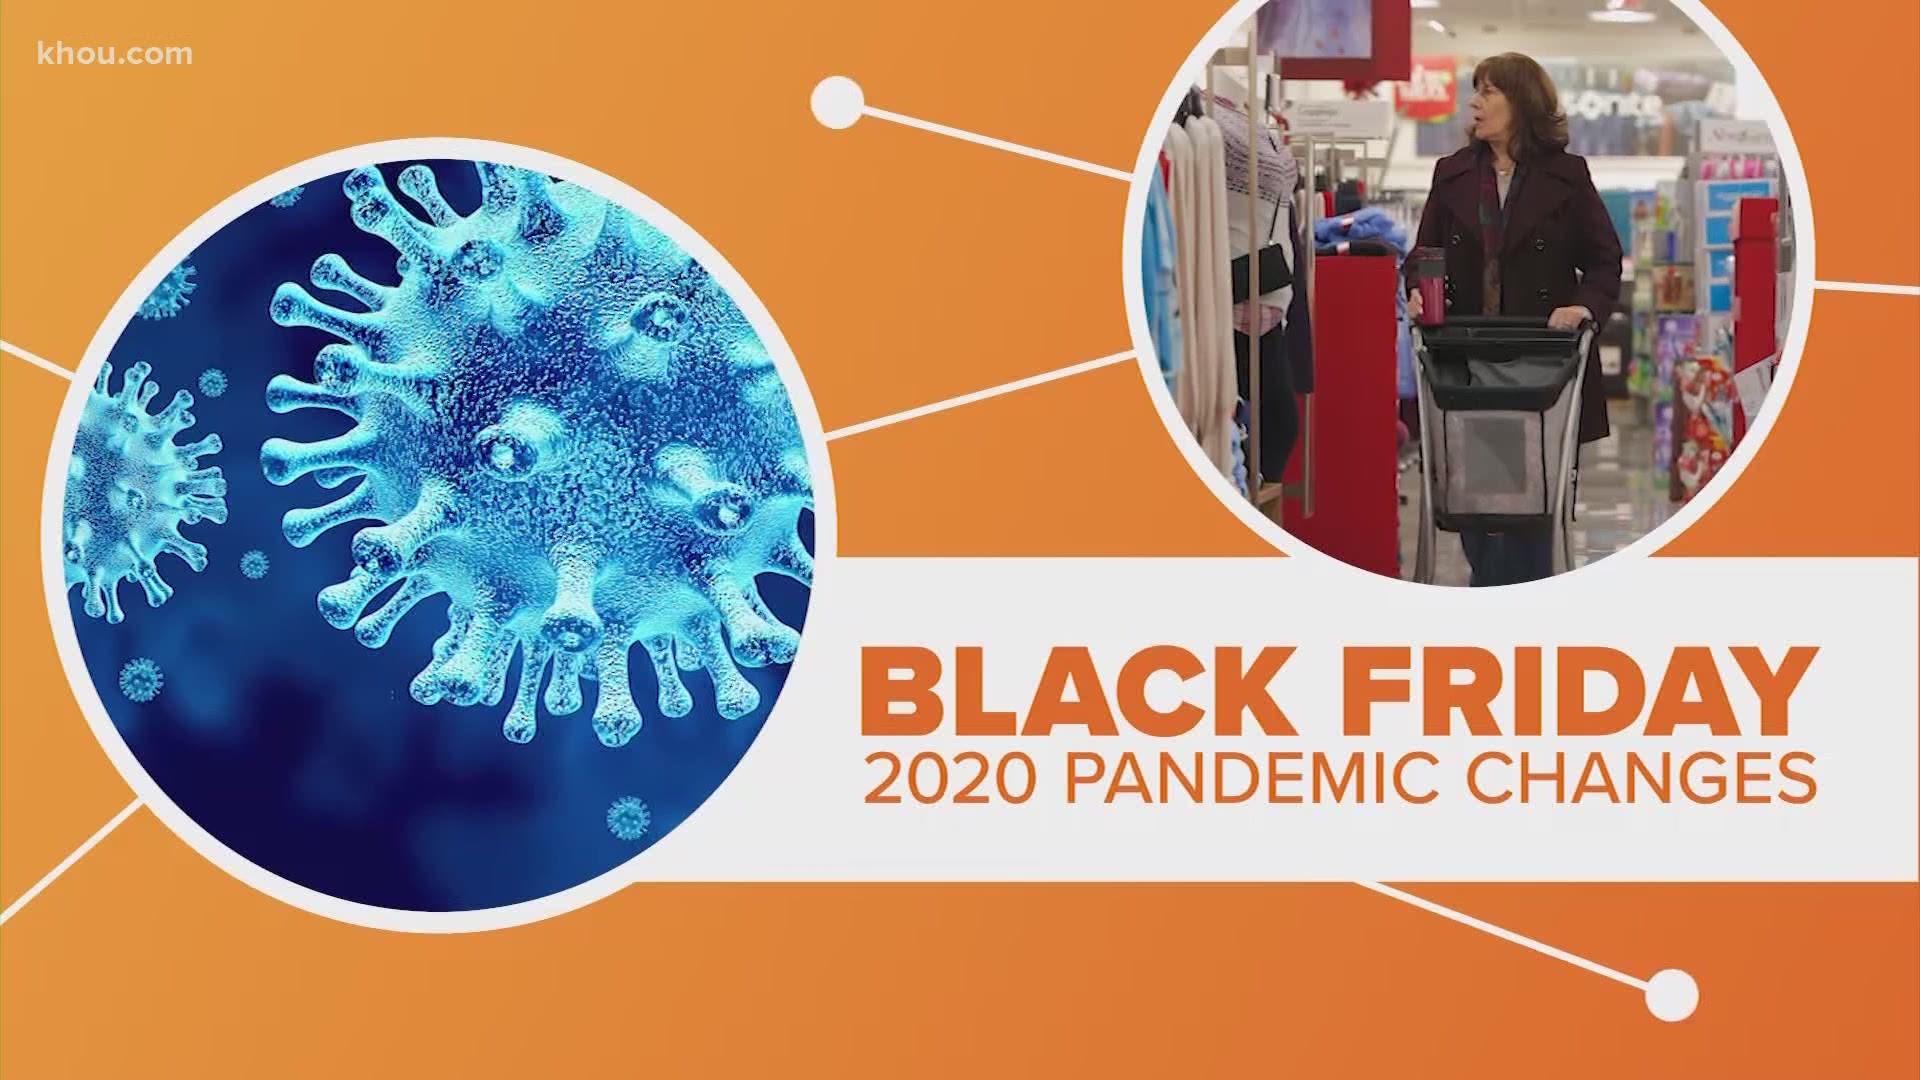 Home Depot releases 2020 Black Friday ad with extended shopping | 0